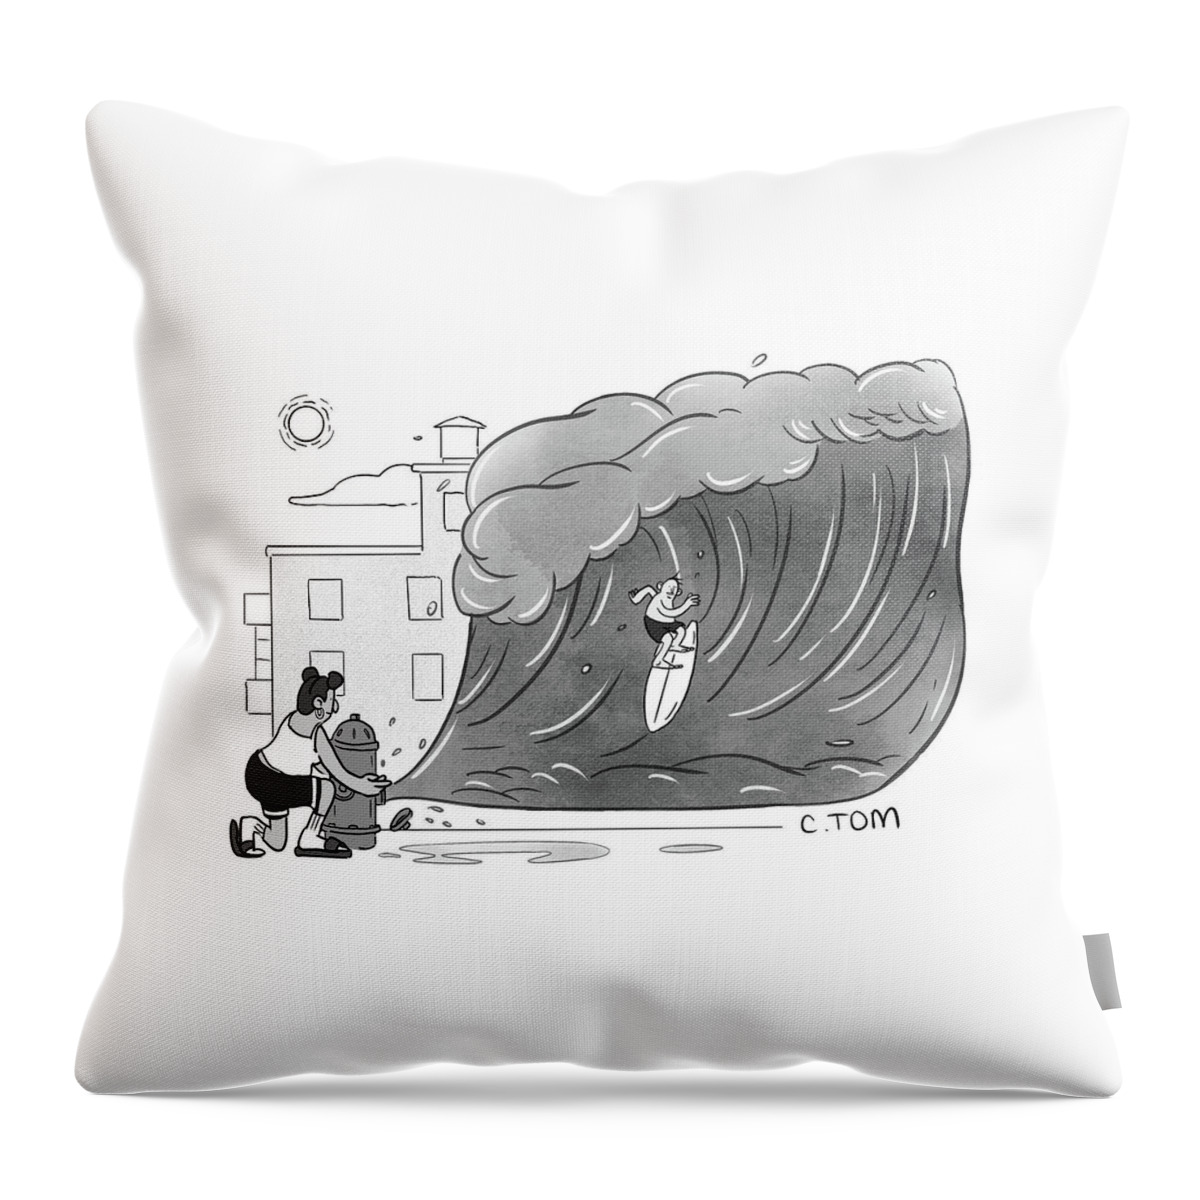 New Yorker July 6, 2022 Throw Pillow